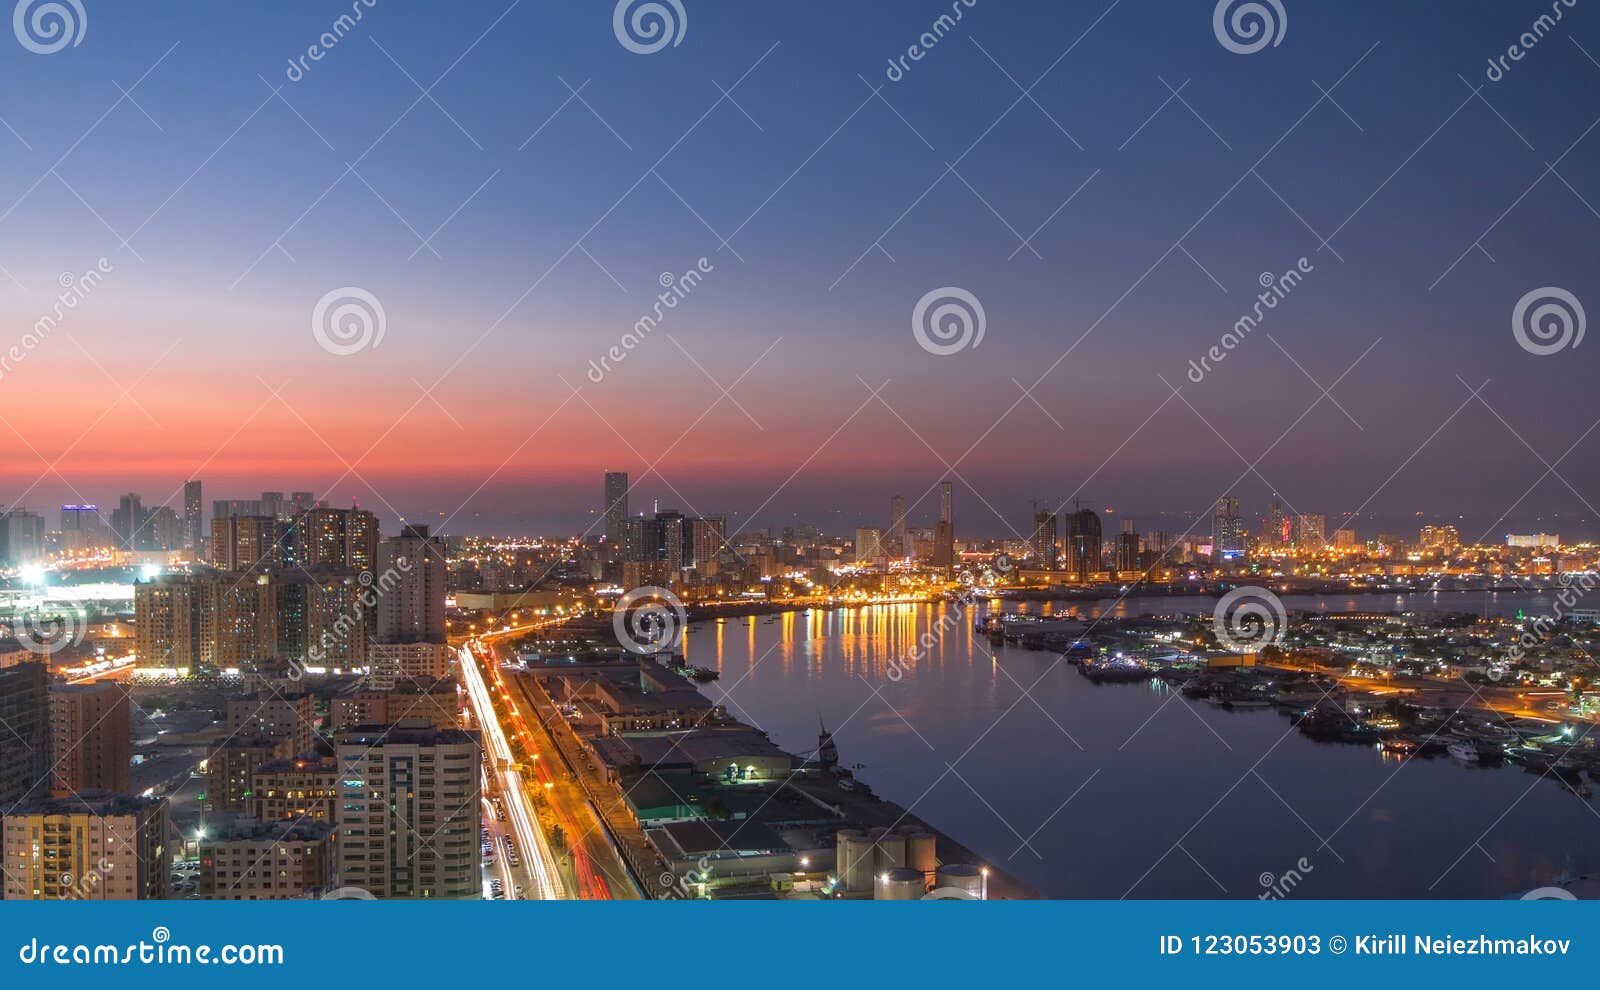 cityscape of ajman from rooftop day to night timelapse. ajman is the capital of the emirate of ajman in the united arab emirates.